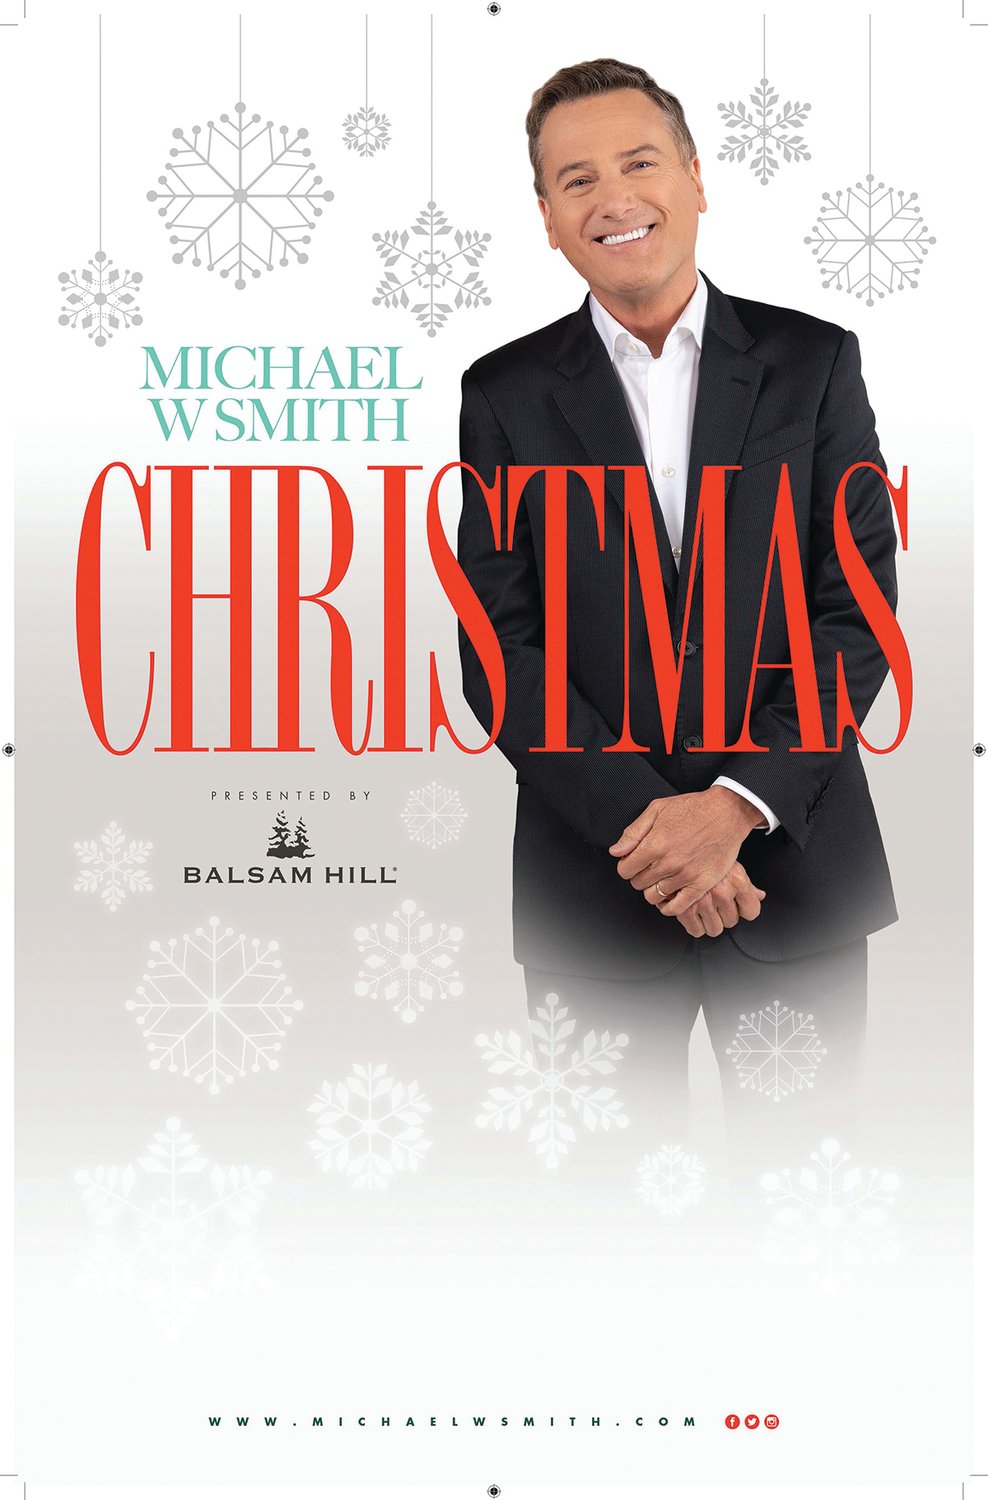 Three-time Grammy Award winner, Michael W. Smith, performs a holiday concert on Monday, Dec. 13 at 7 p.m.